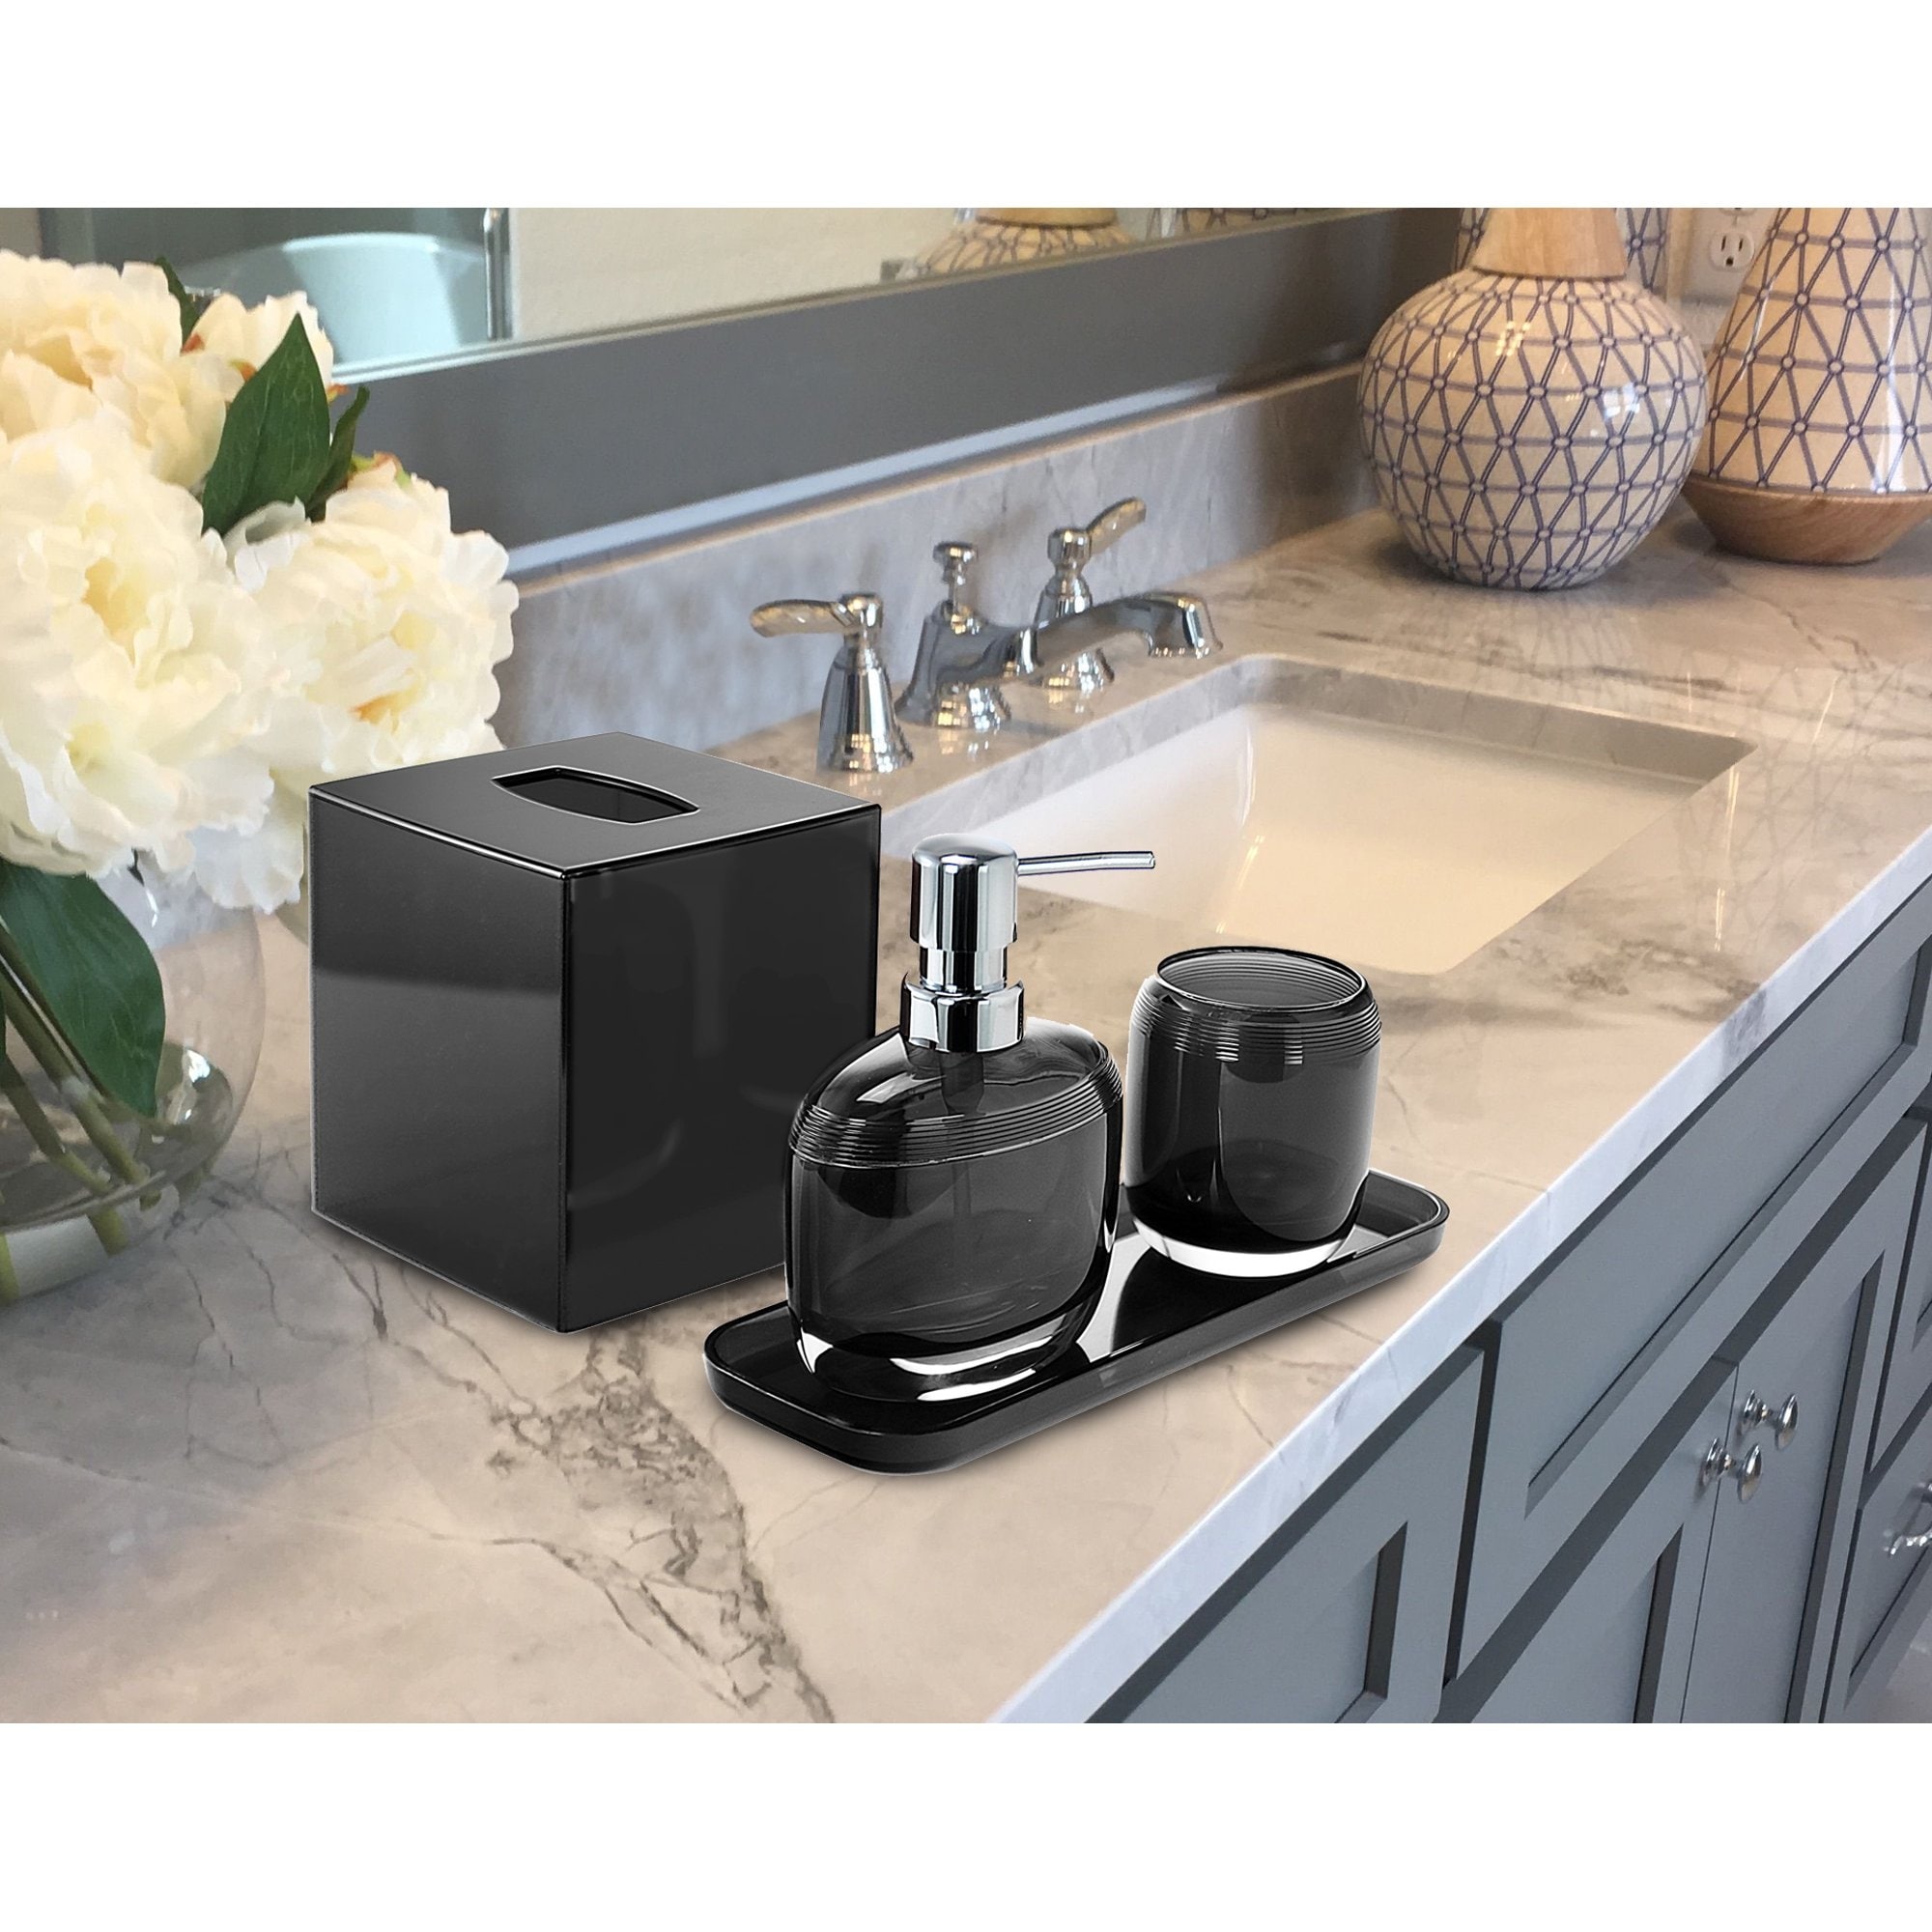 Decozen Bathroom Accessories Set of 6 Includes Soap Lotion Dispenser, Tooth  Brush Holder, Soap Dish, Tumbler, Vanity Tray, and Tissue Box - Black Silver  Gold 